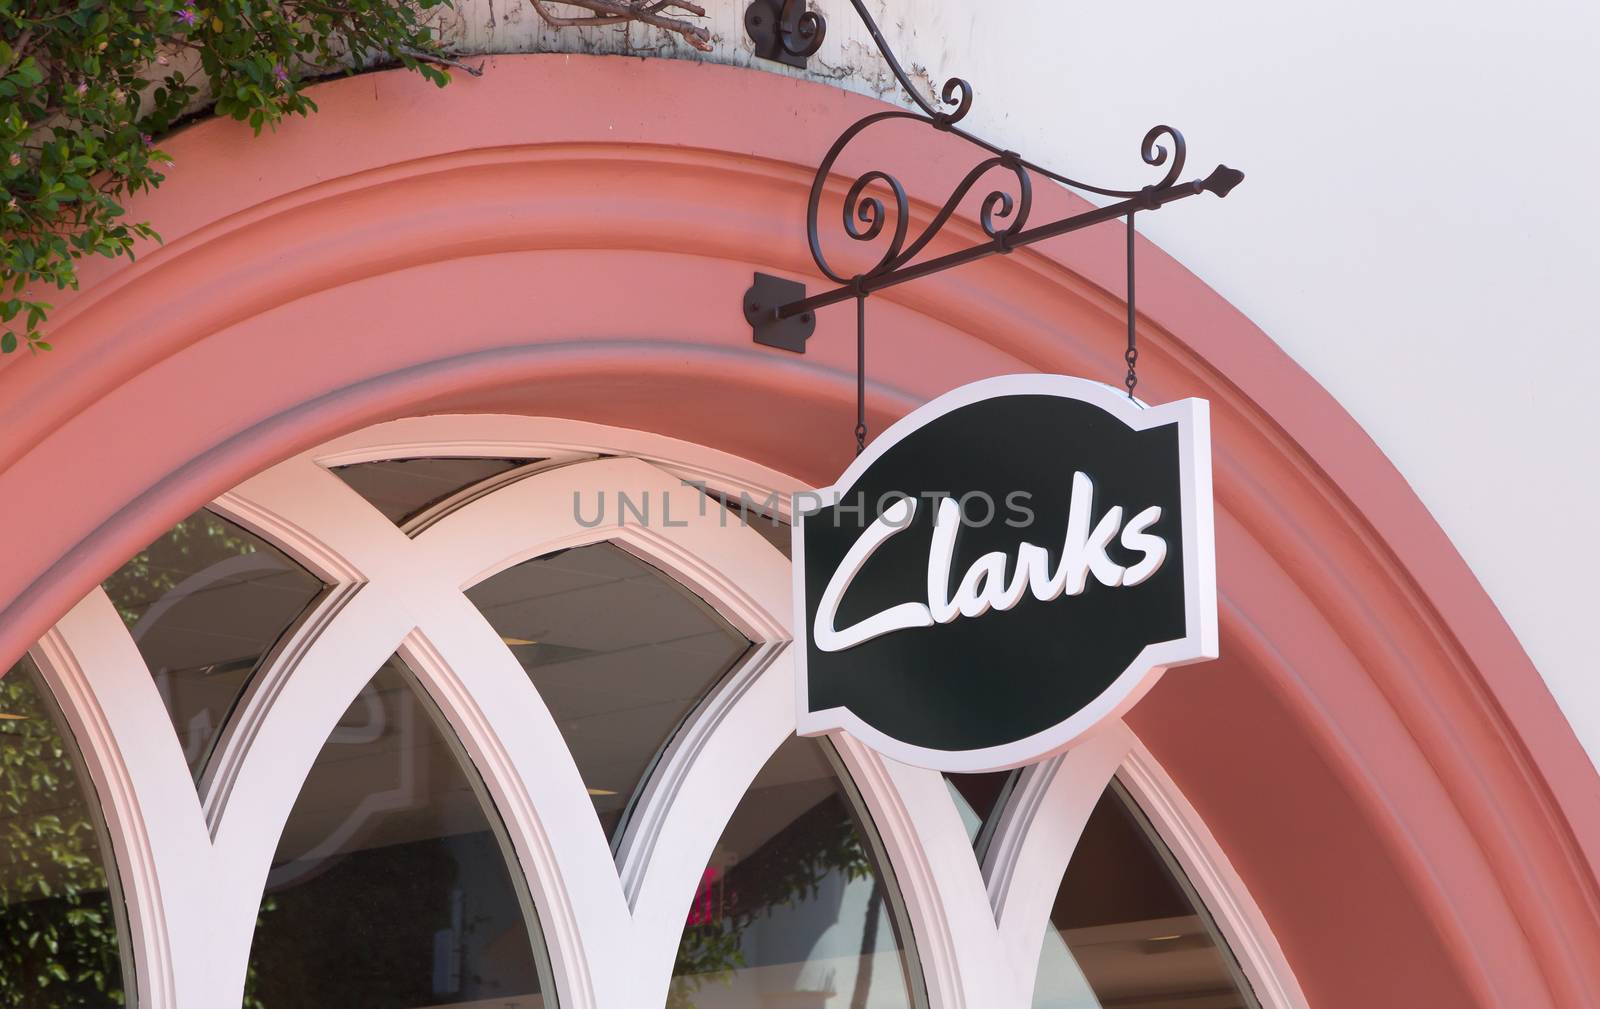 Clarks Retail Store Exterior and Sign by wolterk